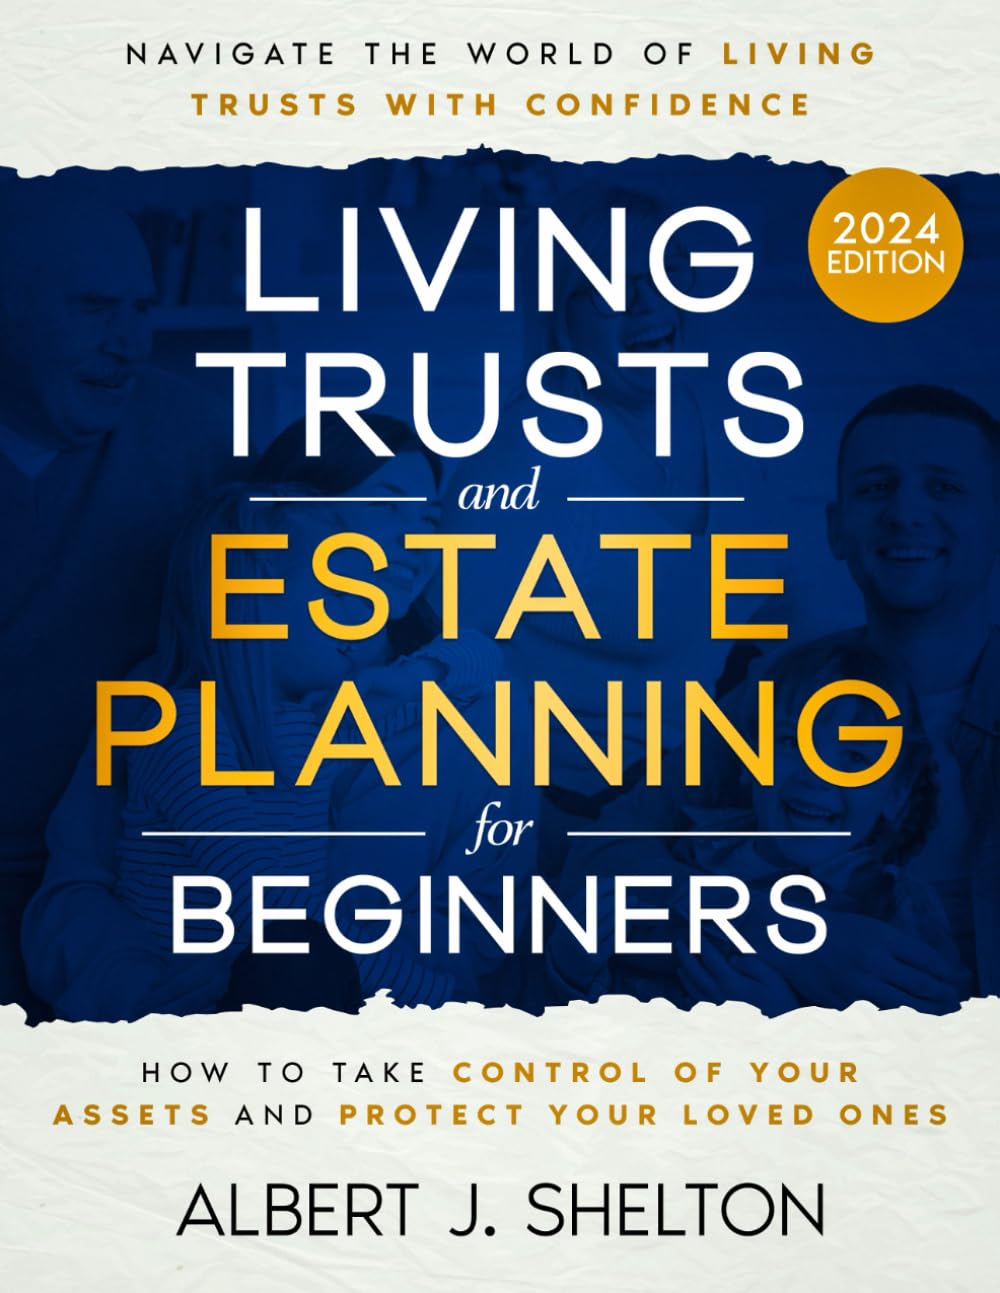 Living Trusts and Estate Planning for Beginners: How to Take Control of Your Assets, Protect Your Loved Ones, and Navigate the World of Living Trusts with Confidence